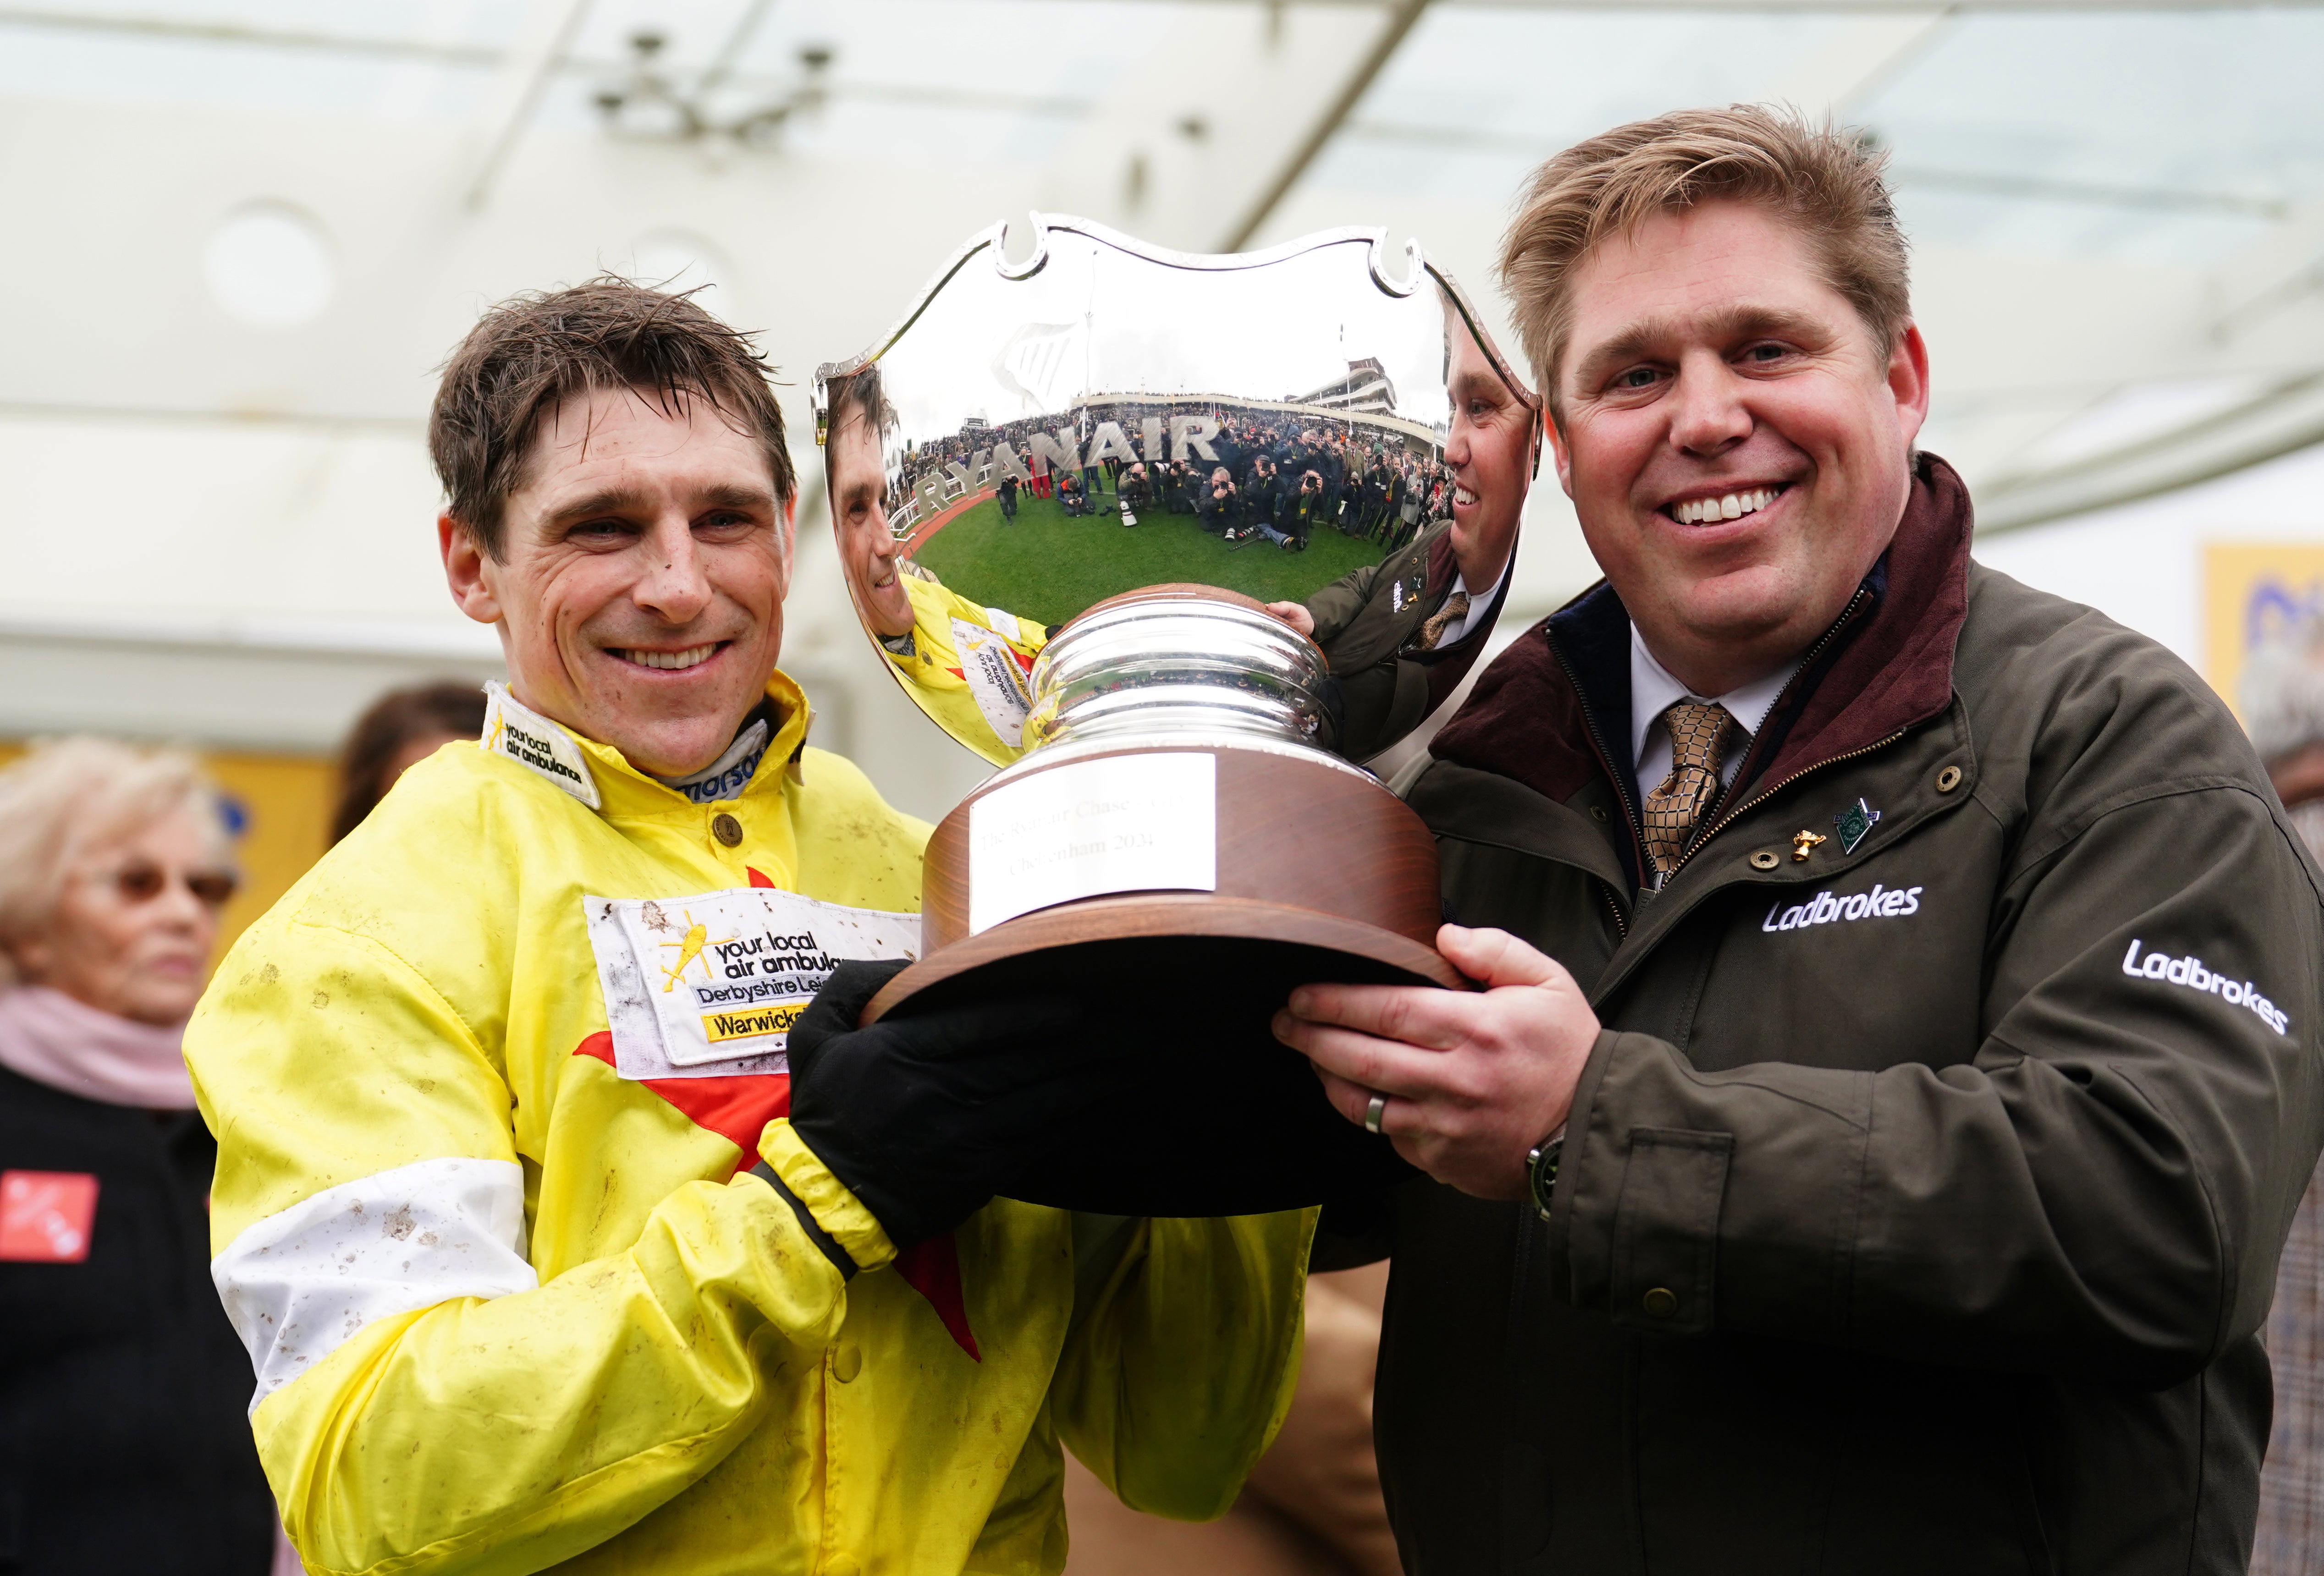 Harry and Dan Skelton made it four wins at the Festival after winning the Ryanair Steeple Chase